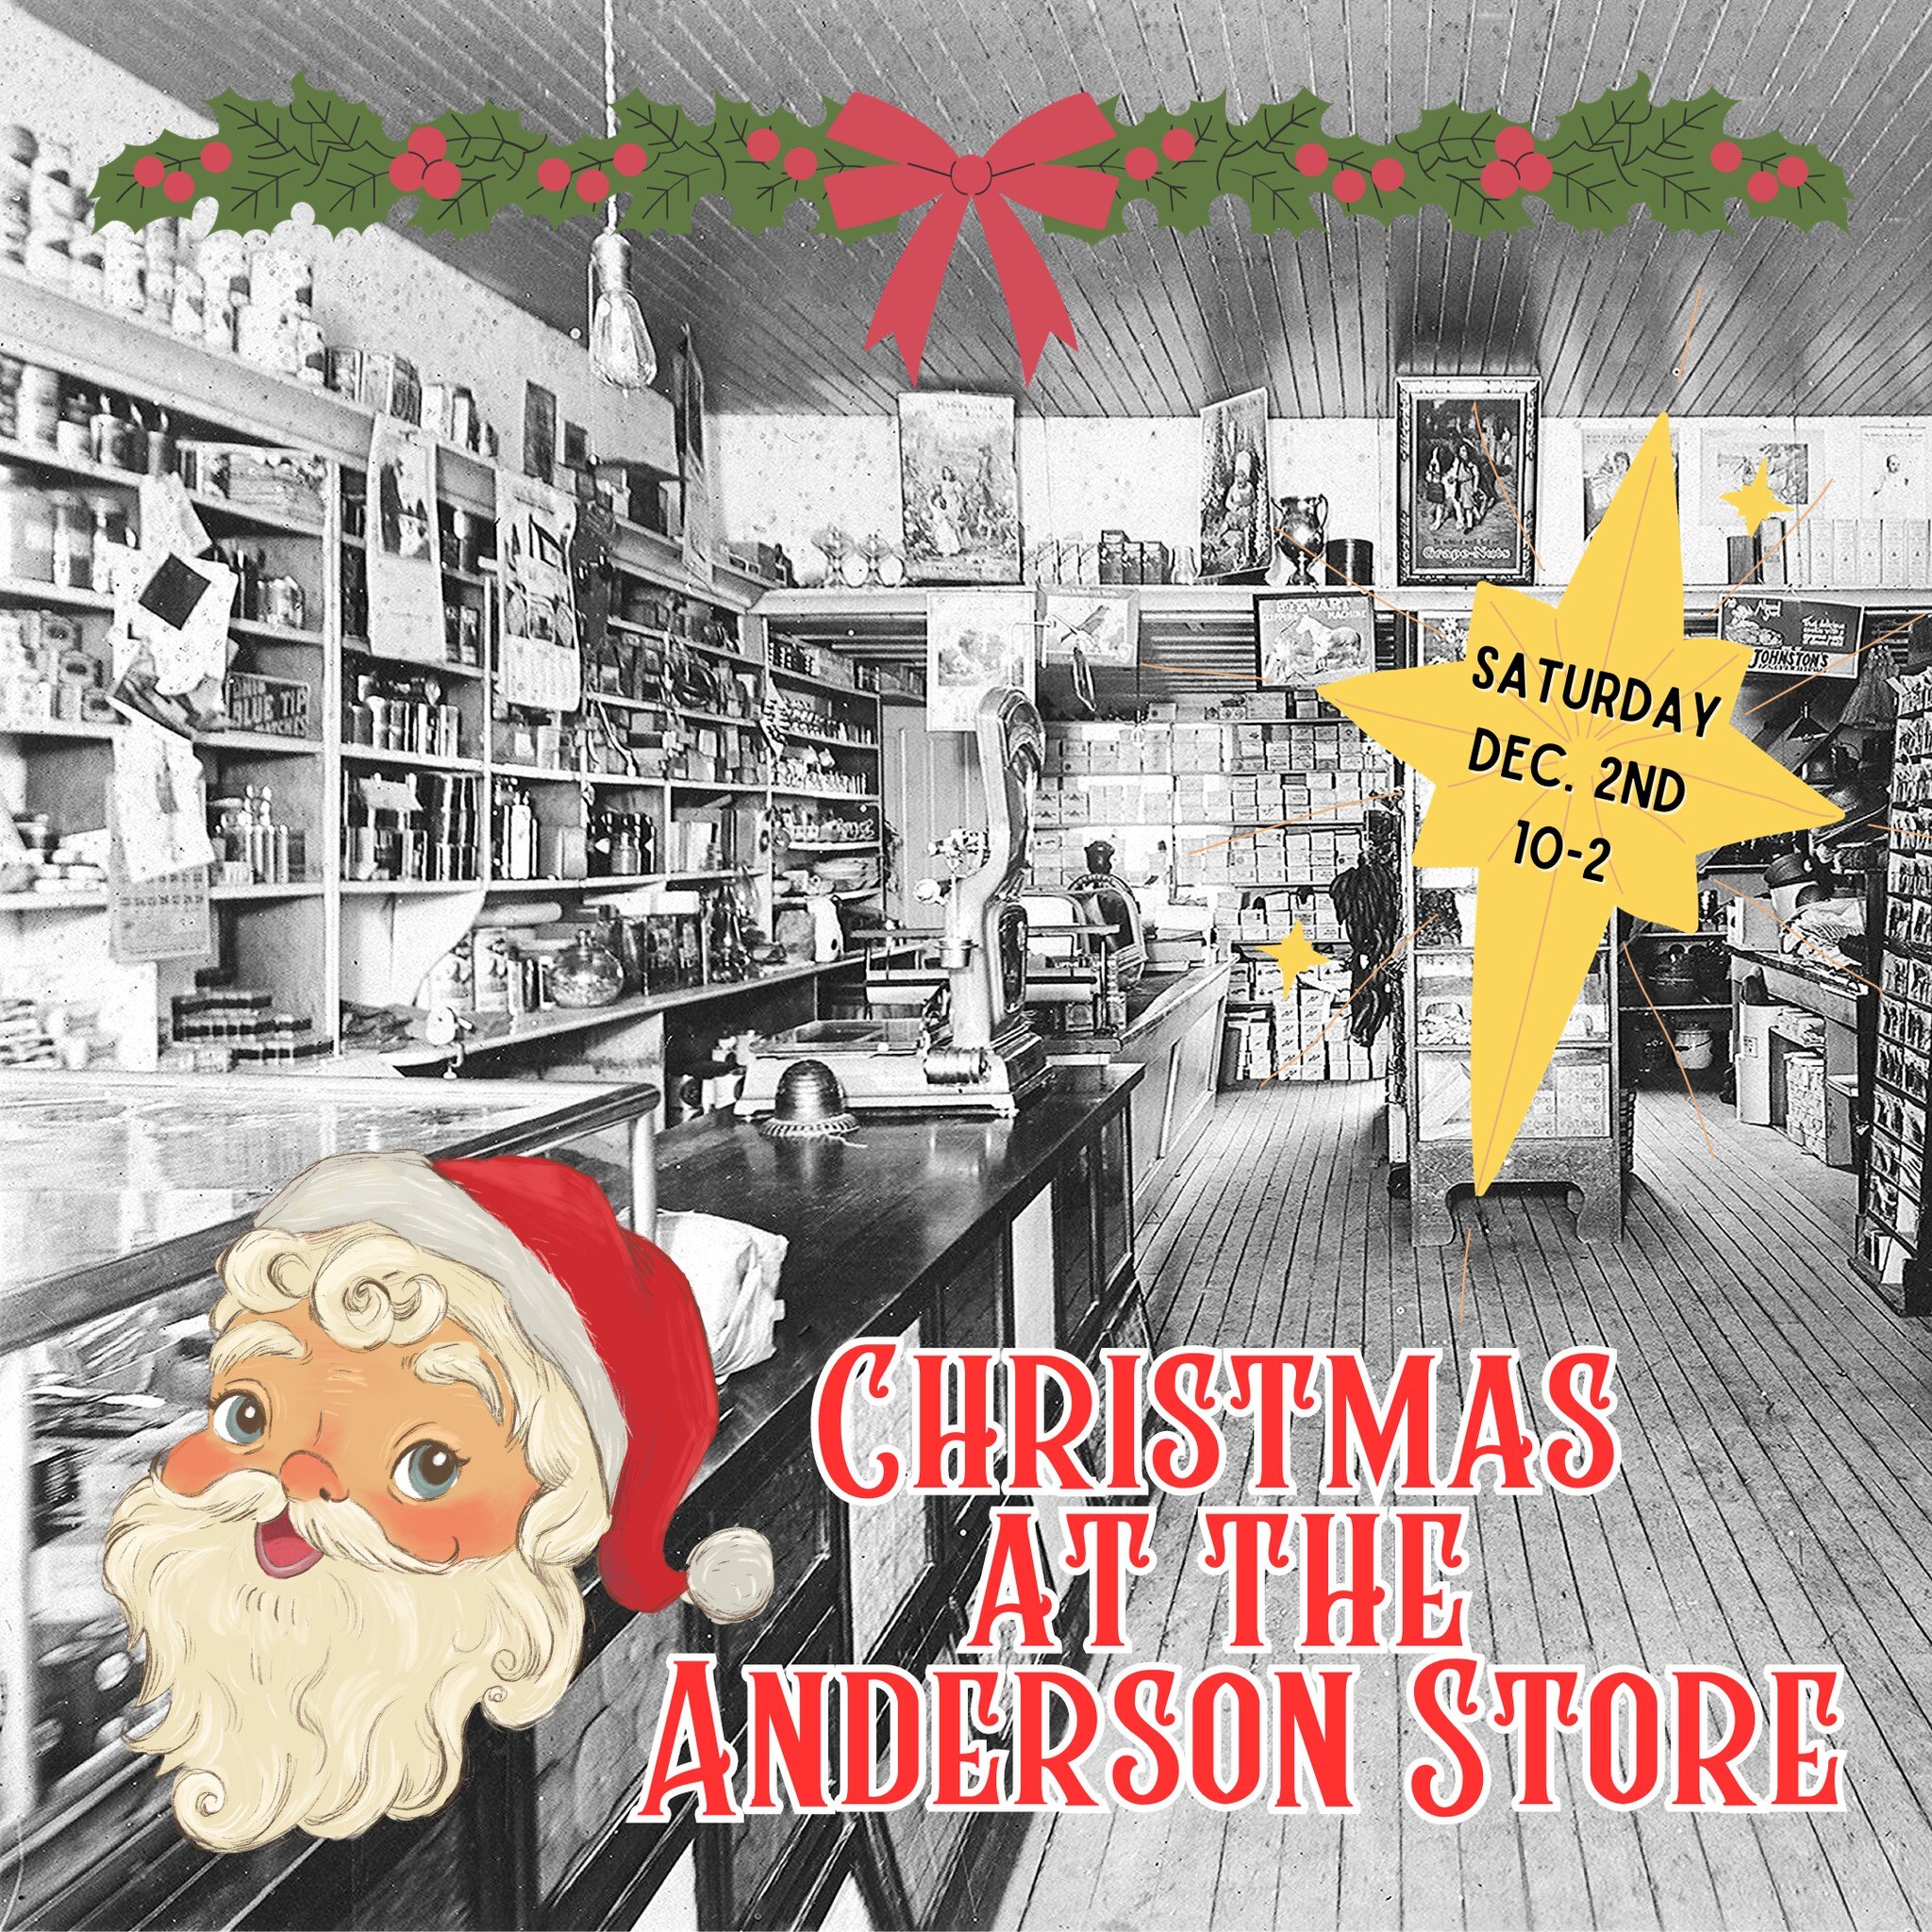 Don't miss the unique opportunity to visit the historic Anderson Store during the winter this Saturday, December 2nd from 10AM-2PM for @ephraim_wi Christmas in the Village! We will have special holiday cards and prints by Karsten and Ellen Topelmann 